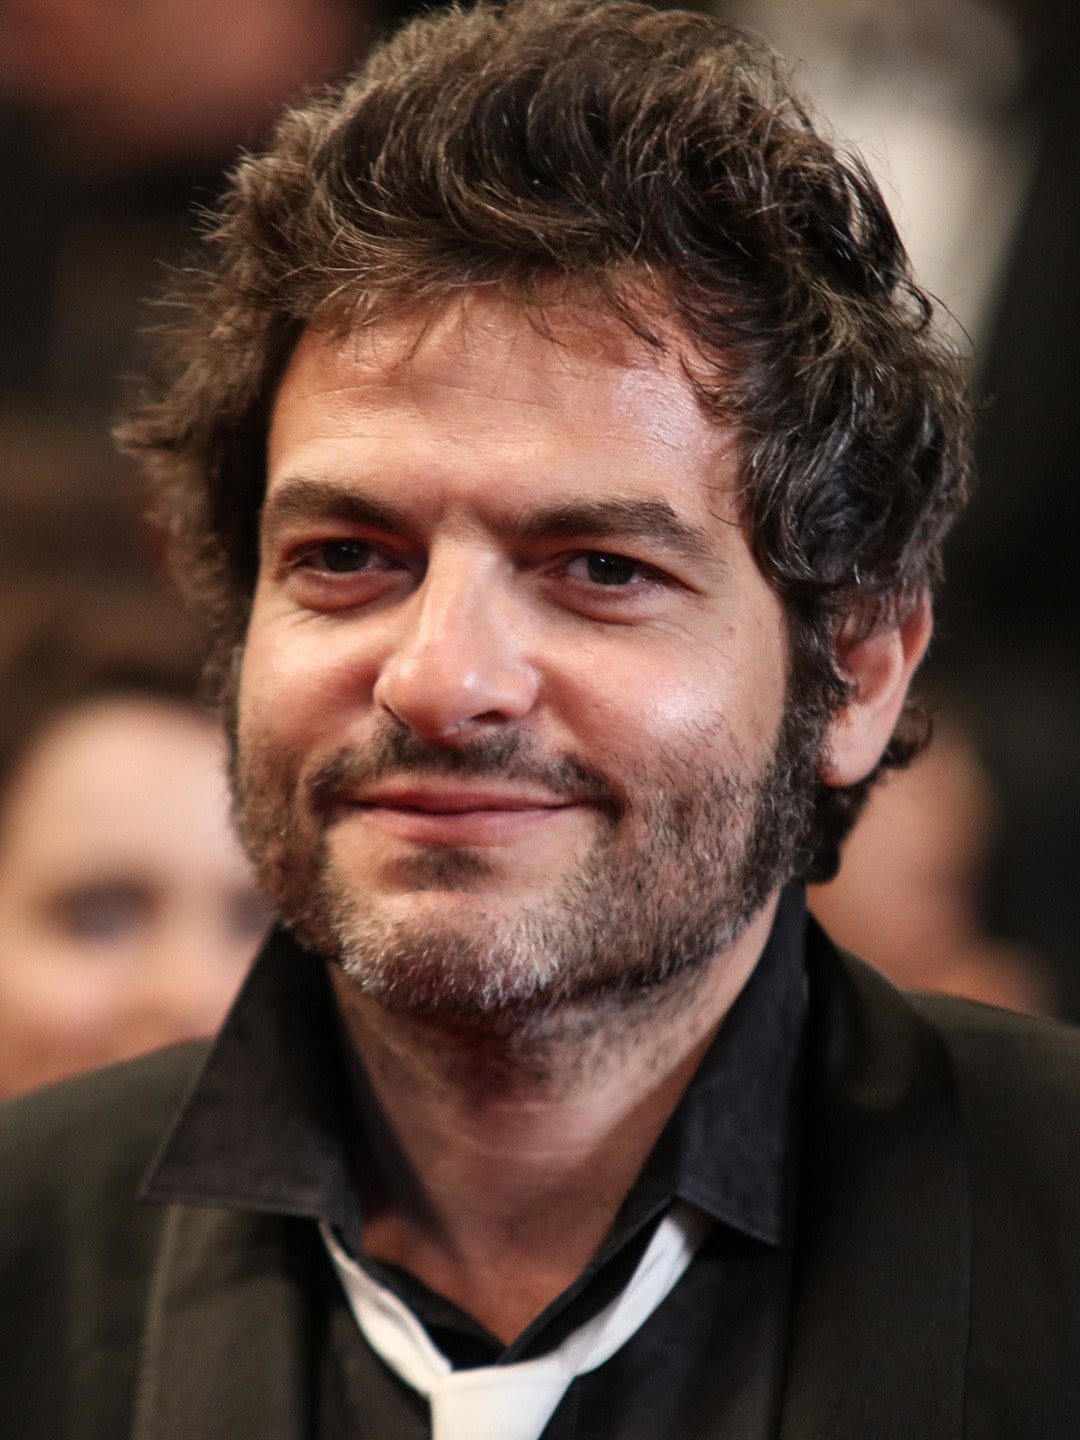 Matthieu Chedid French Singer, Songwriter, Composer, Actor